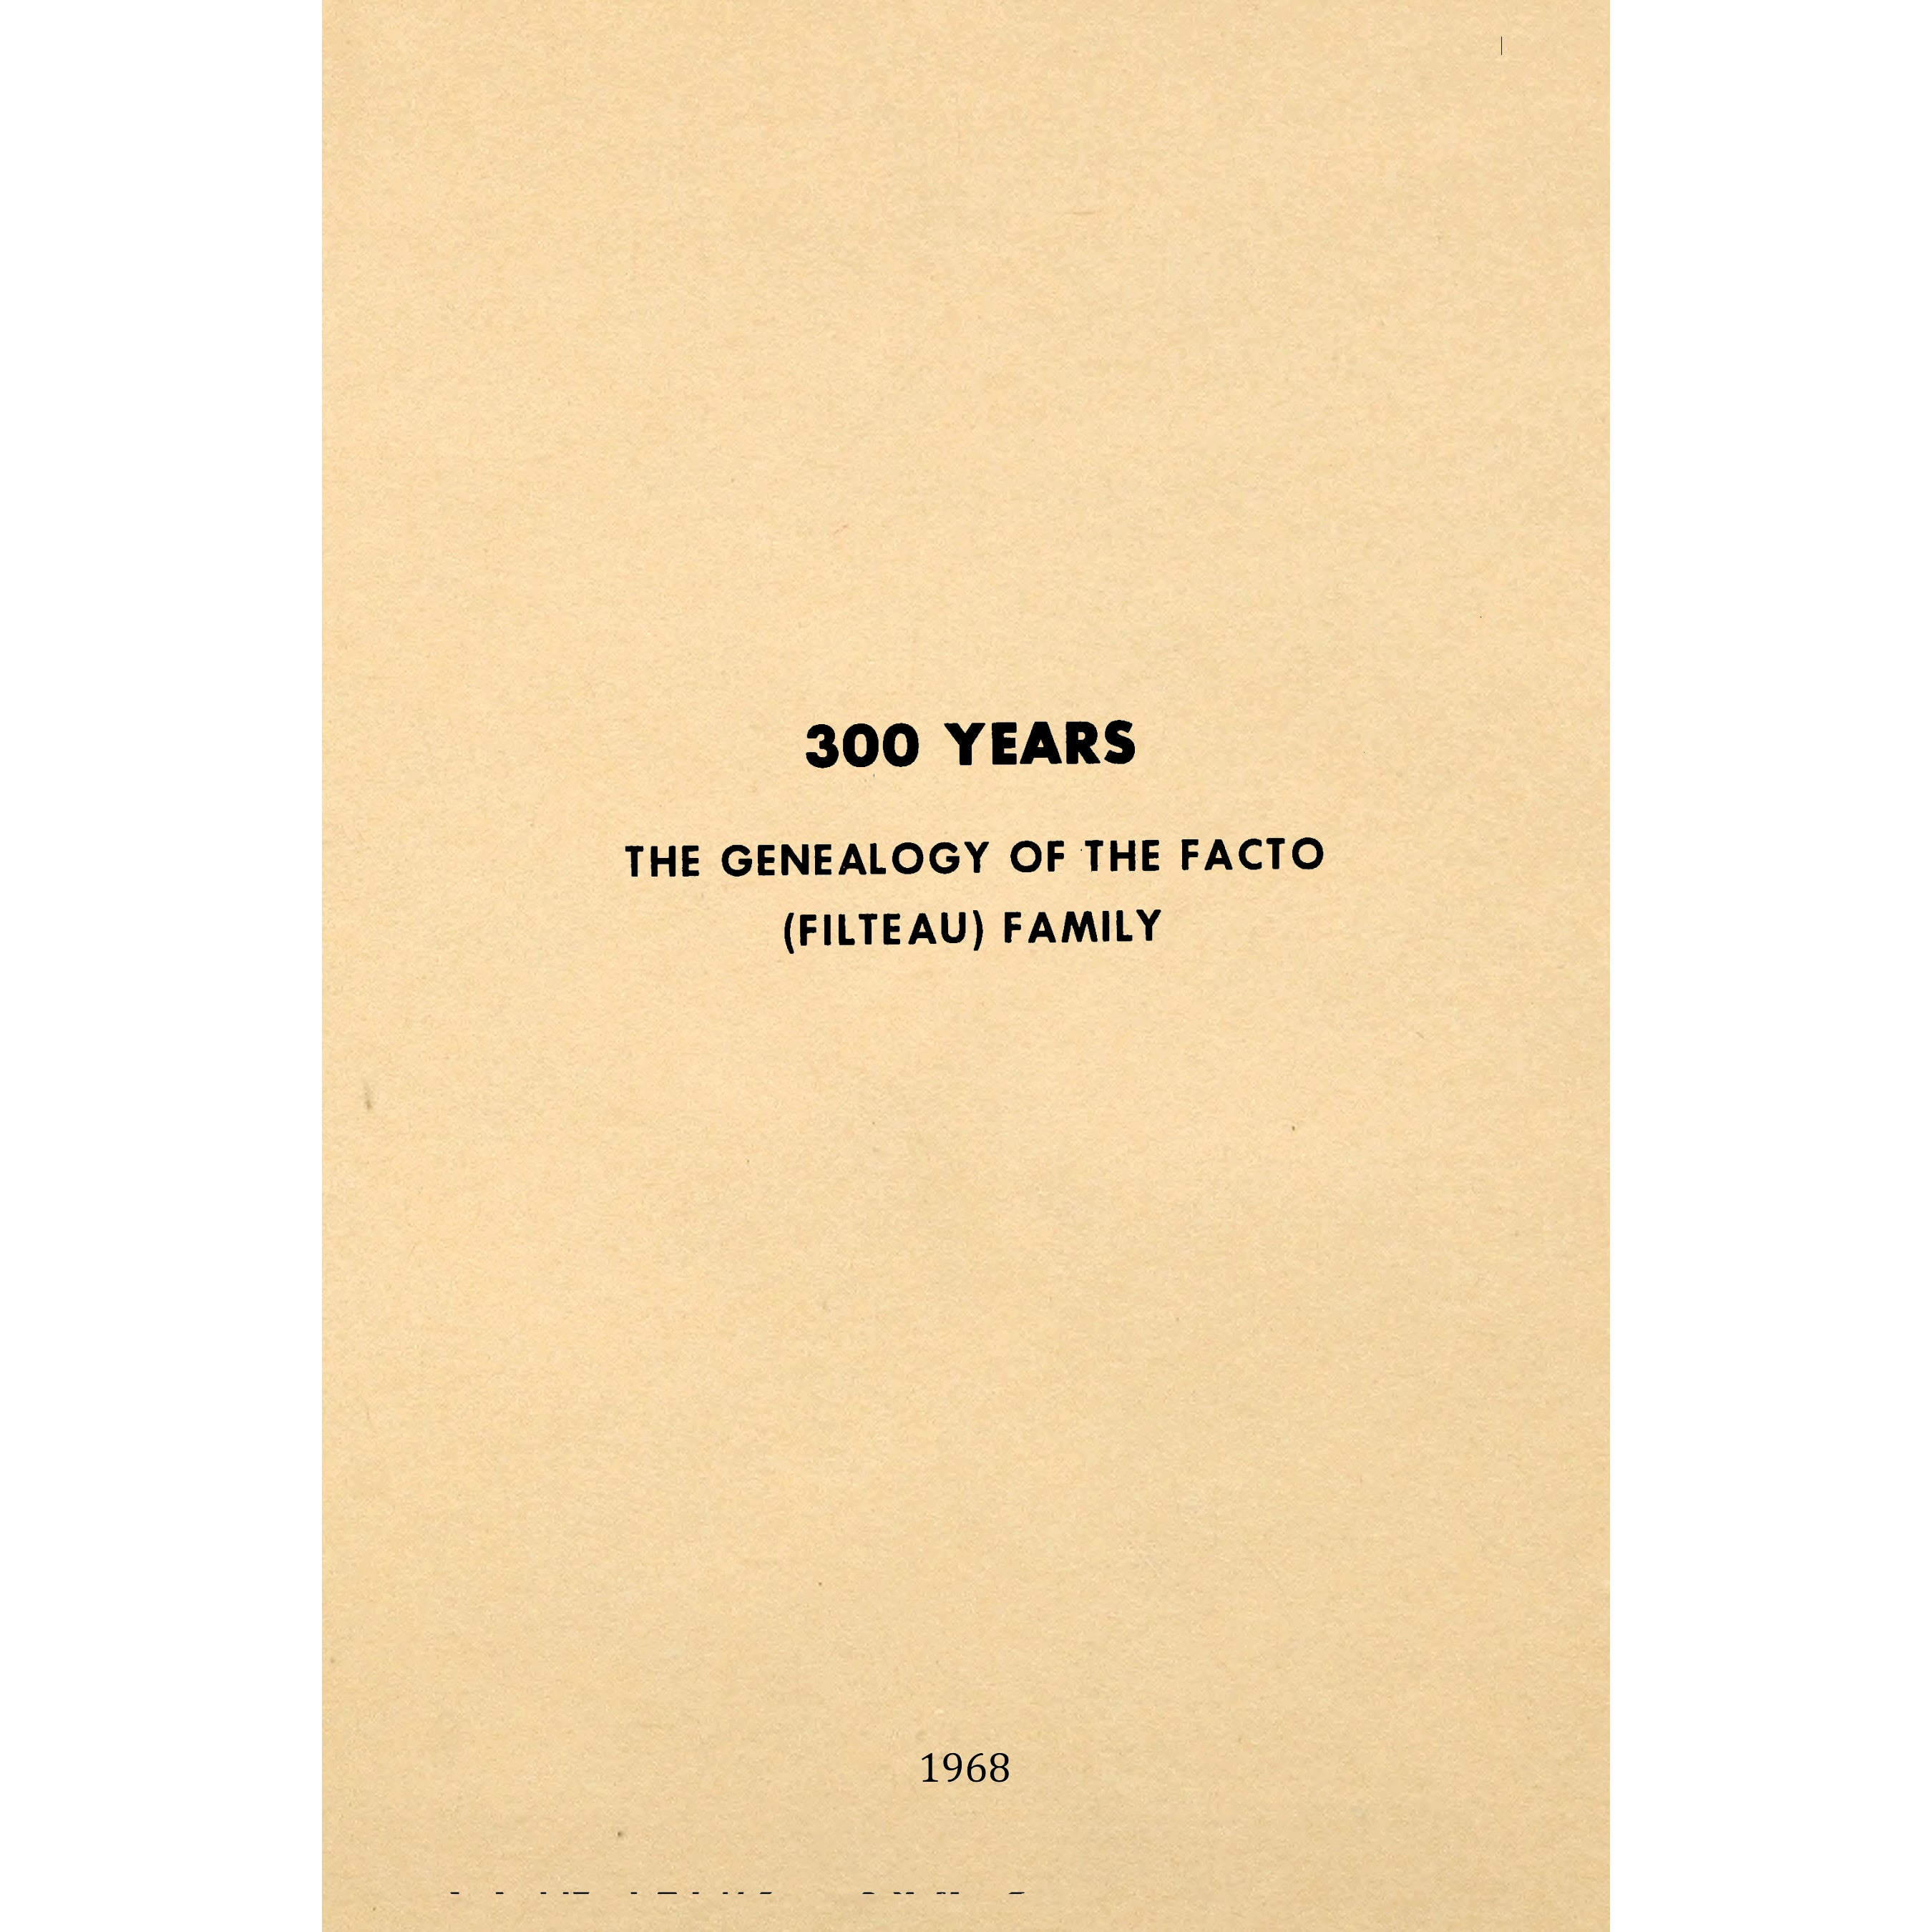 300 years genealogy of the Facto family